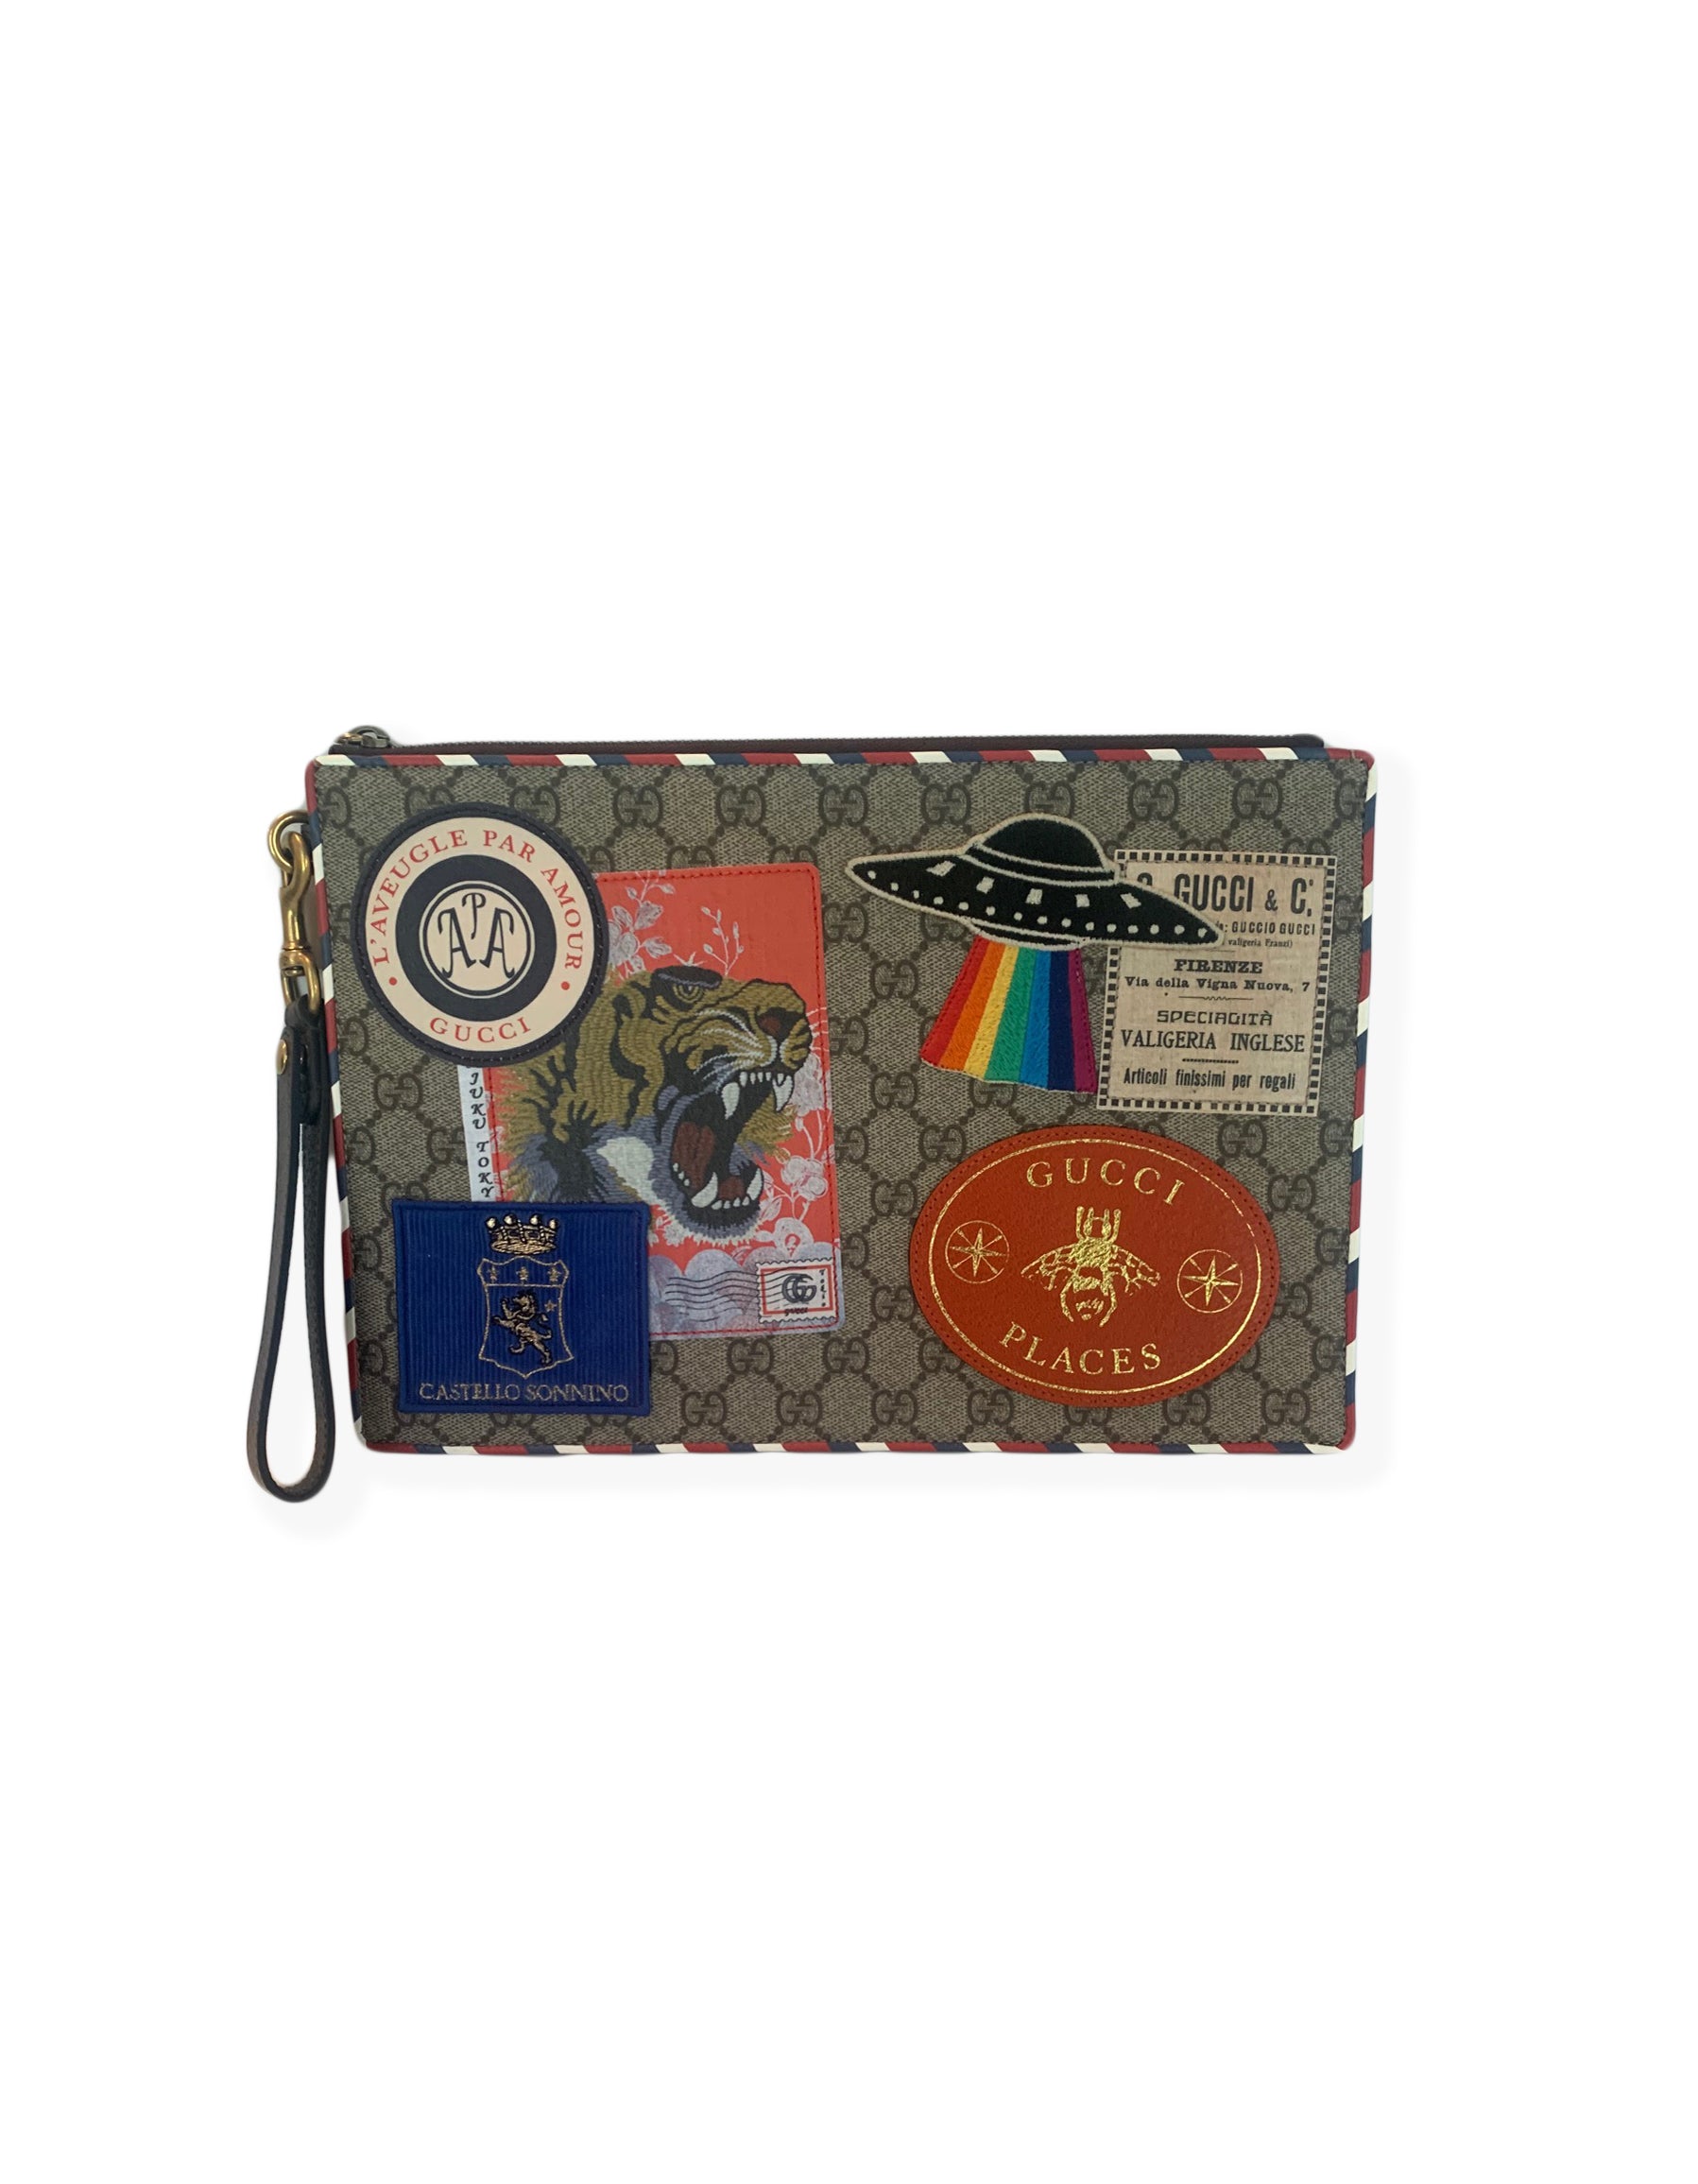 Gucci GG Supreme Monogram Places Courrier Embroidered Zip Pouch